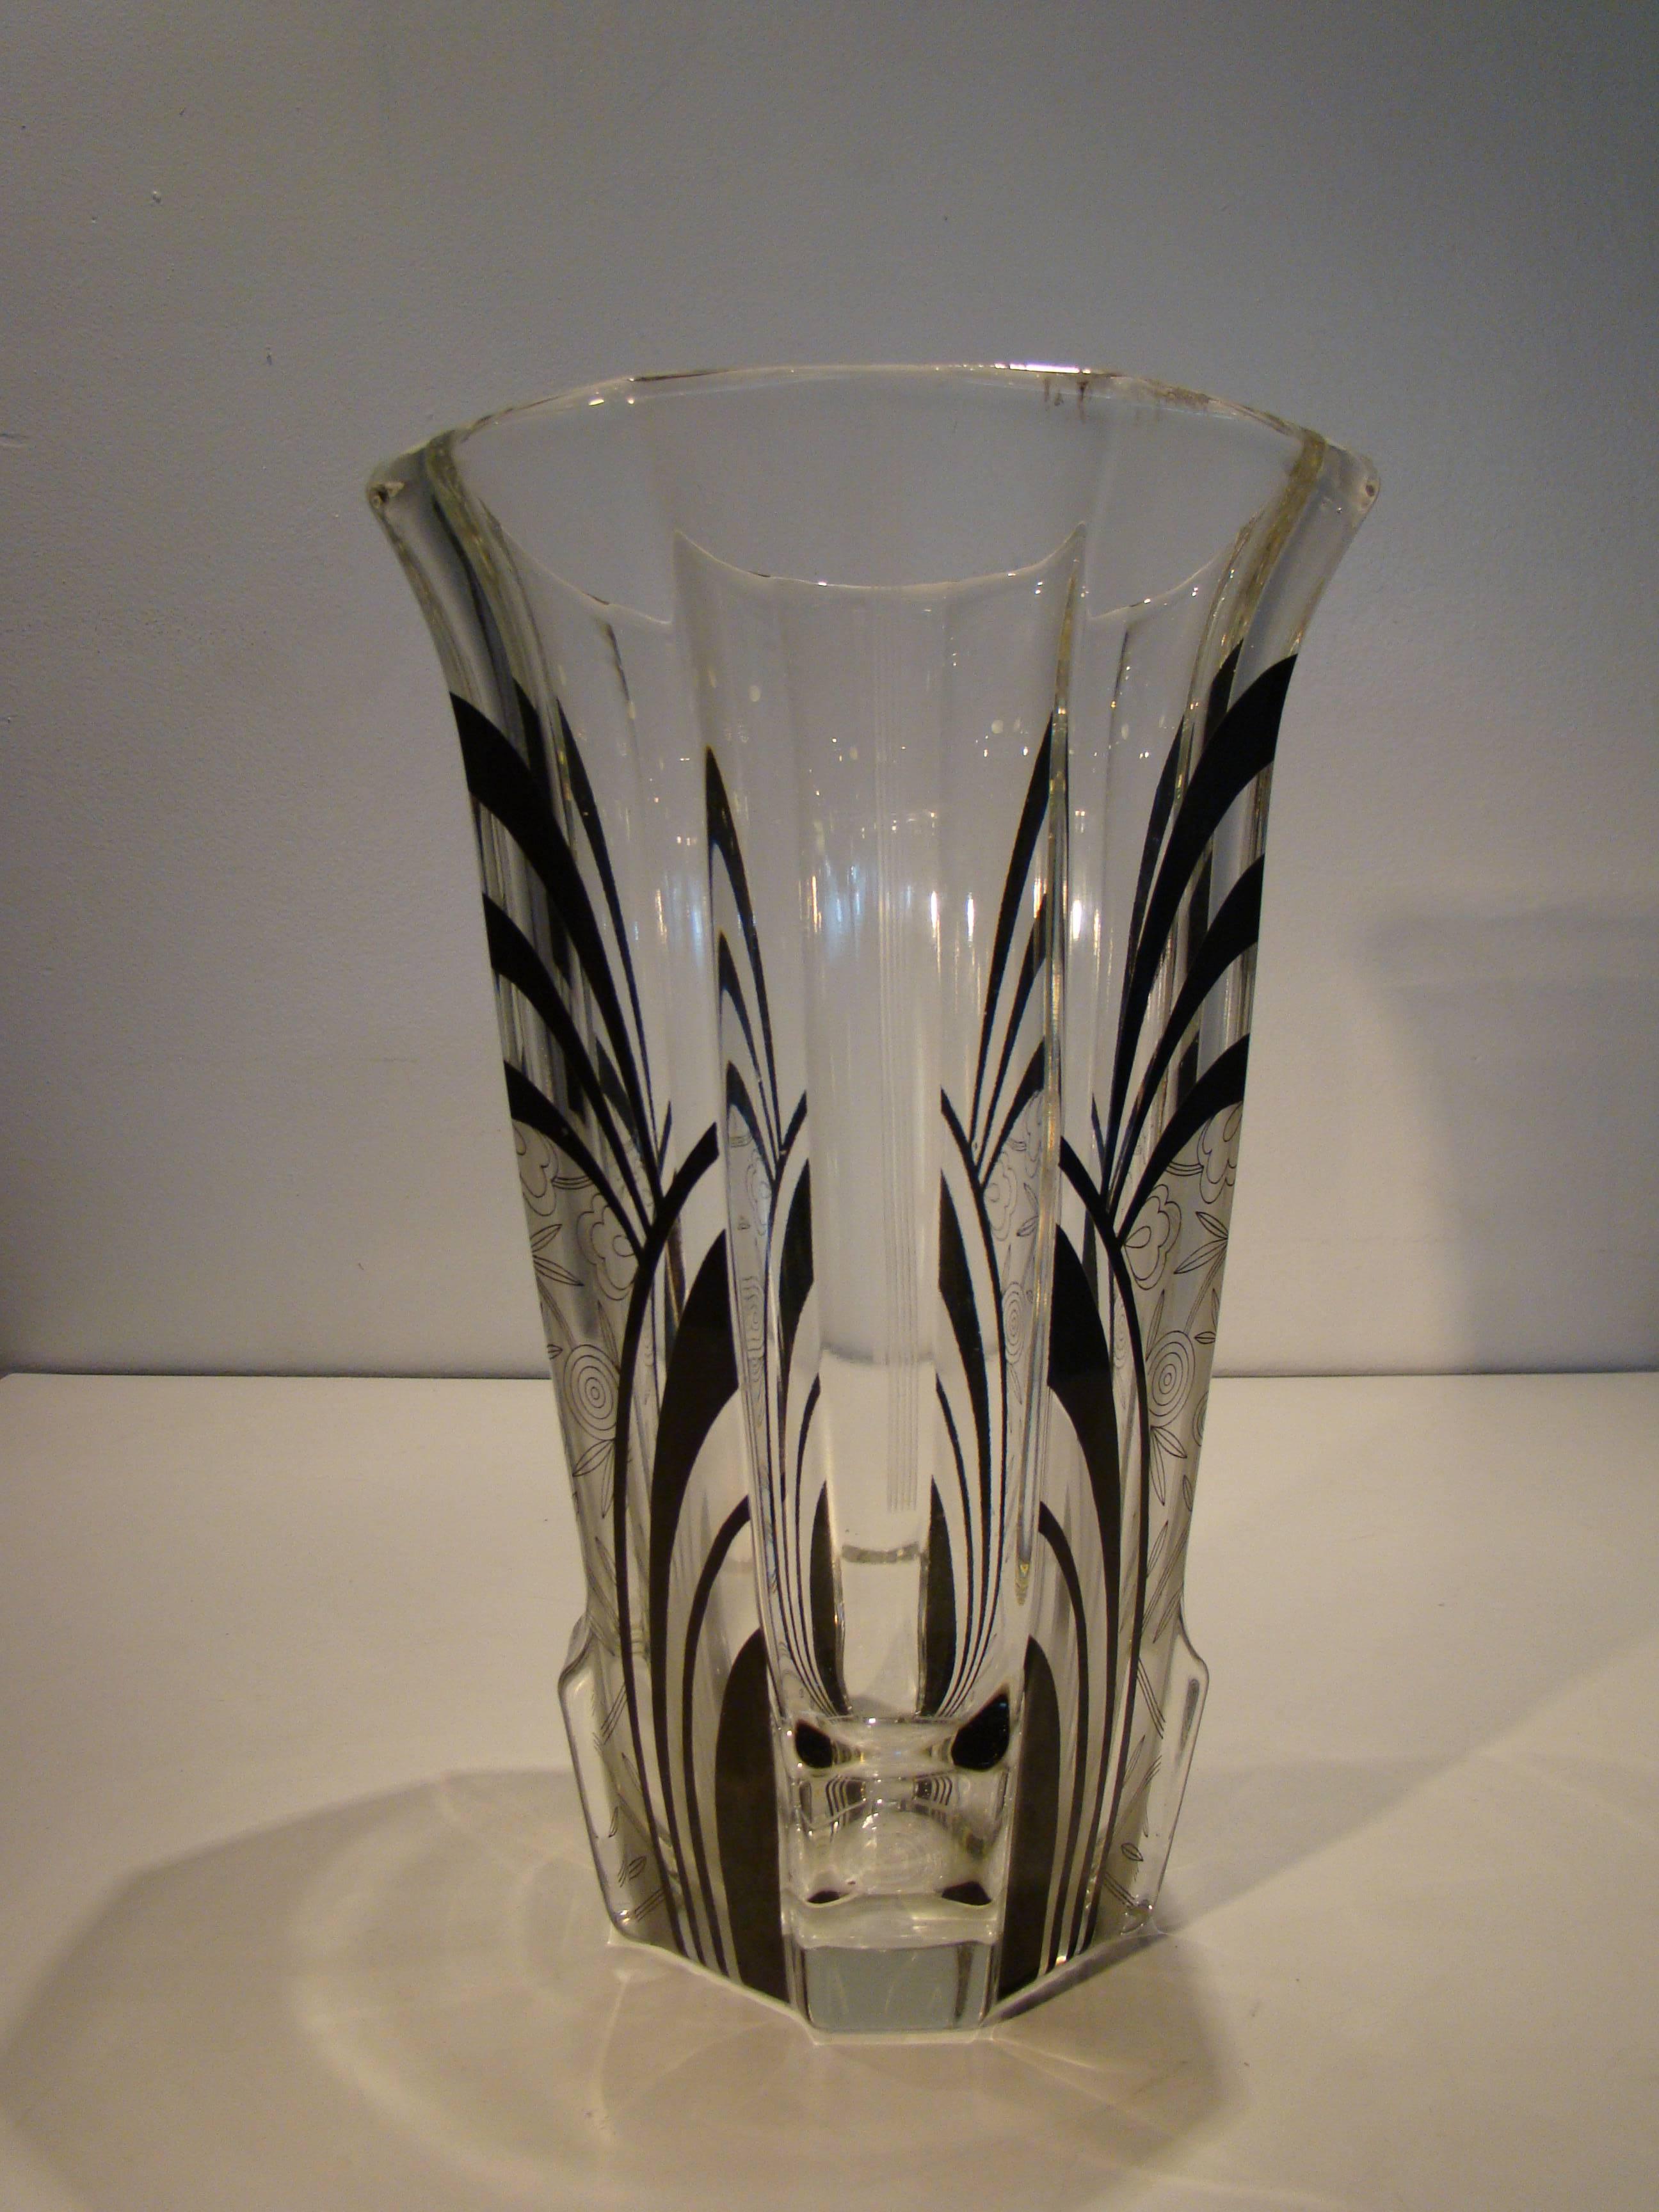 Beautiful and substantial Art Deco geometric vase in the style of Karl Palda. Enamel and acid etch detail adorn this piece. Exquisite period piece.